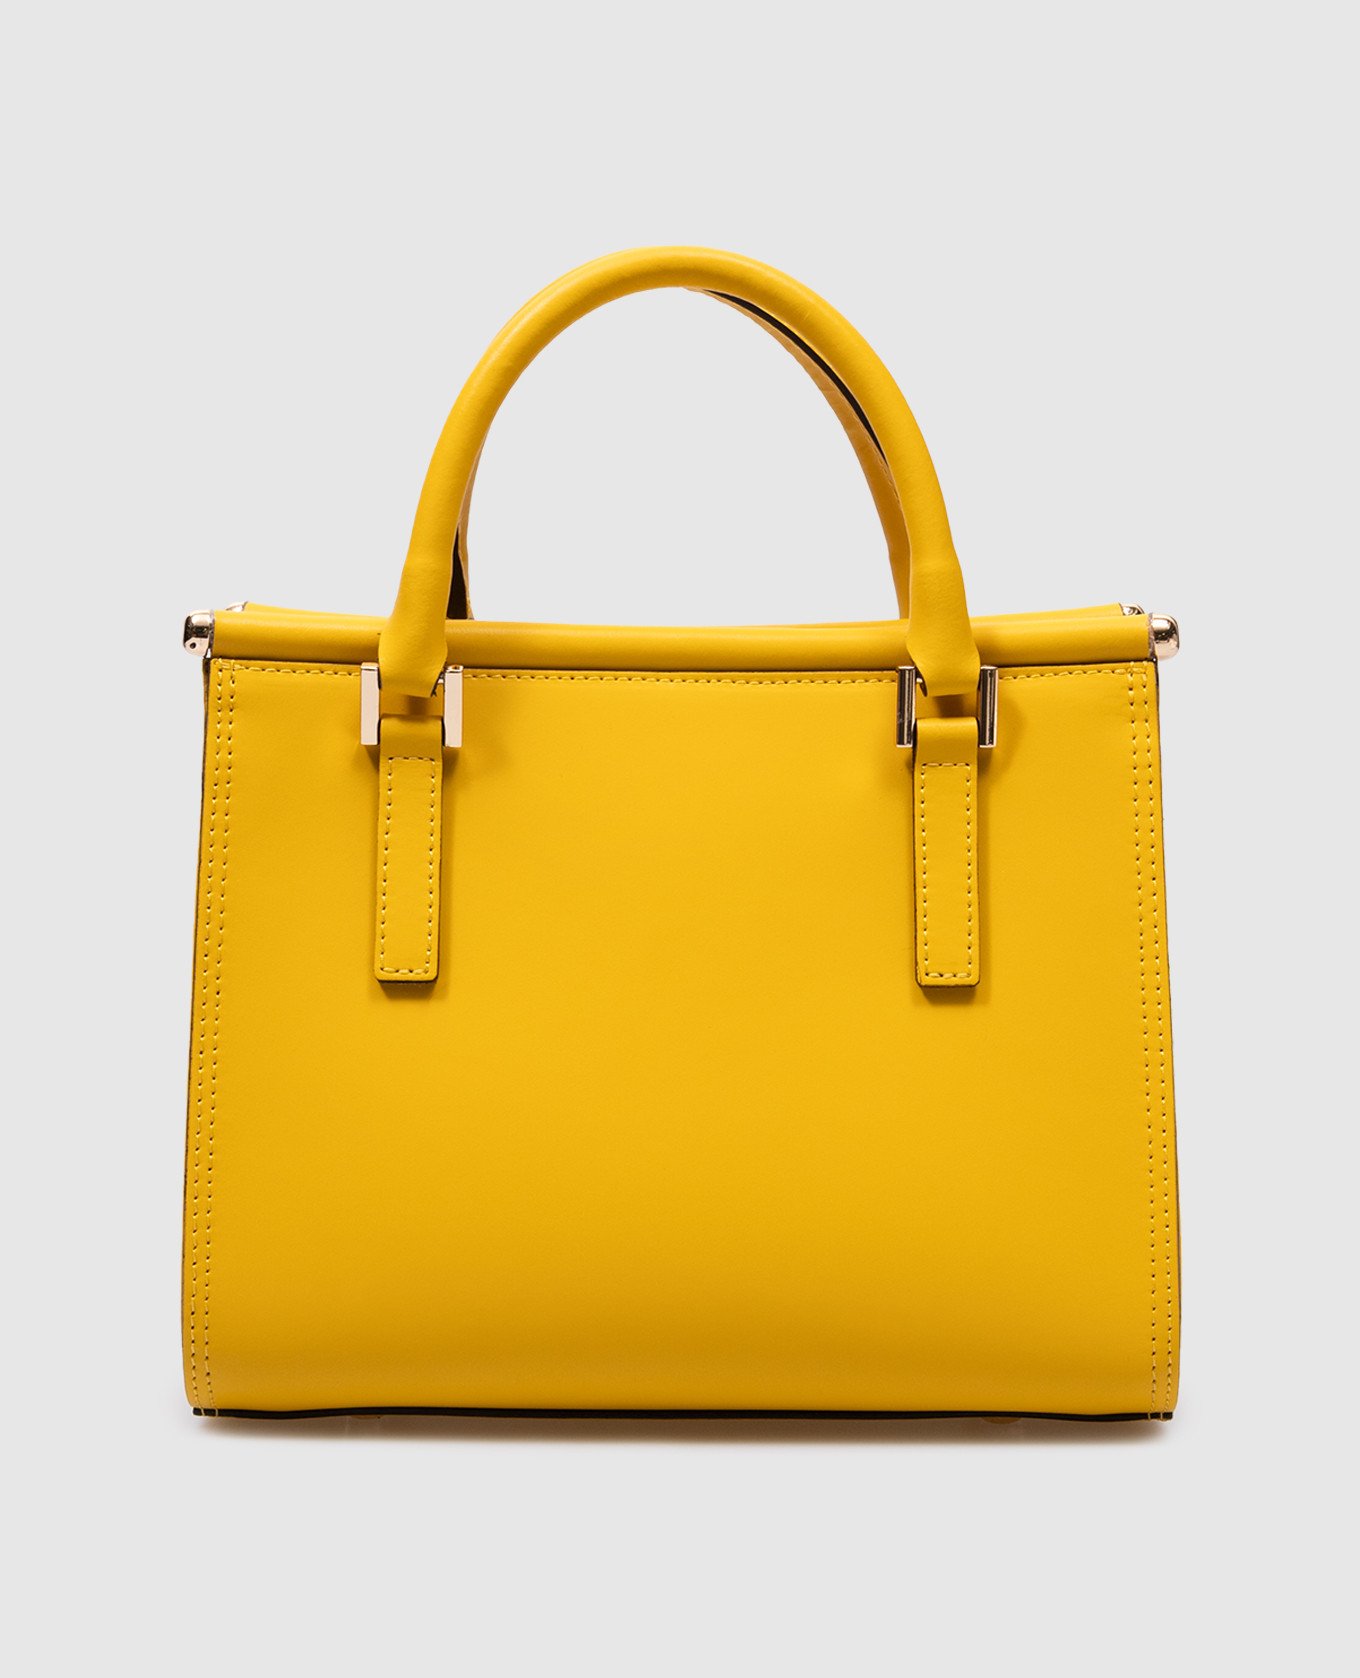 Yellow leather tote bag